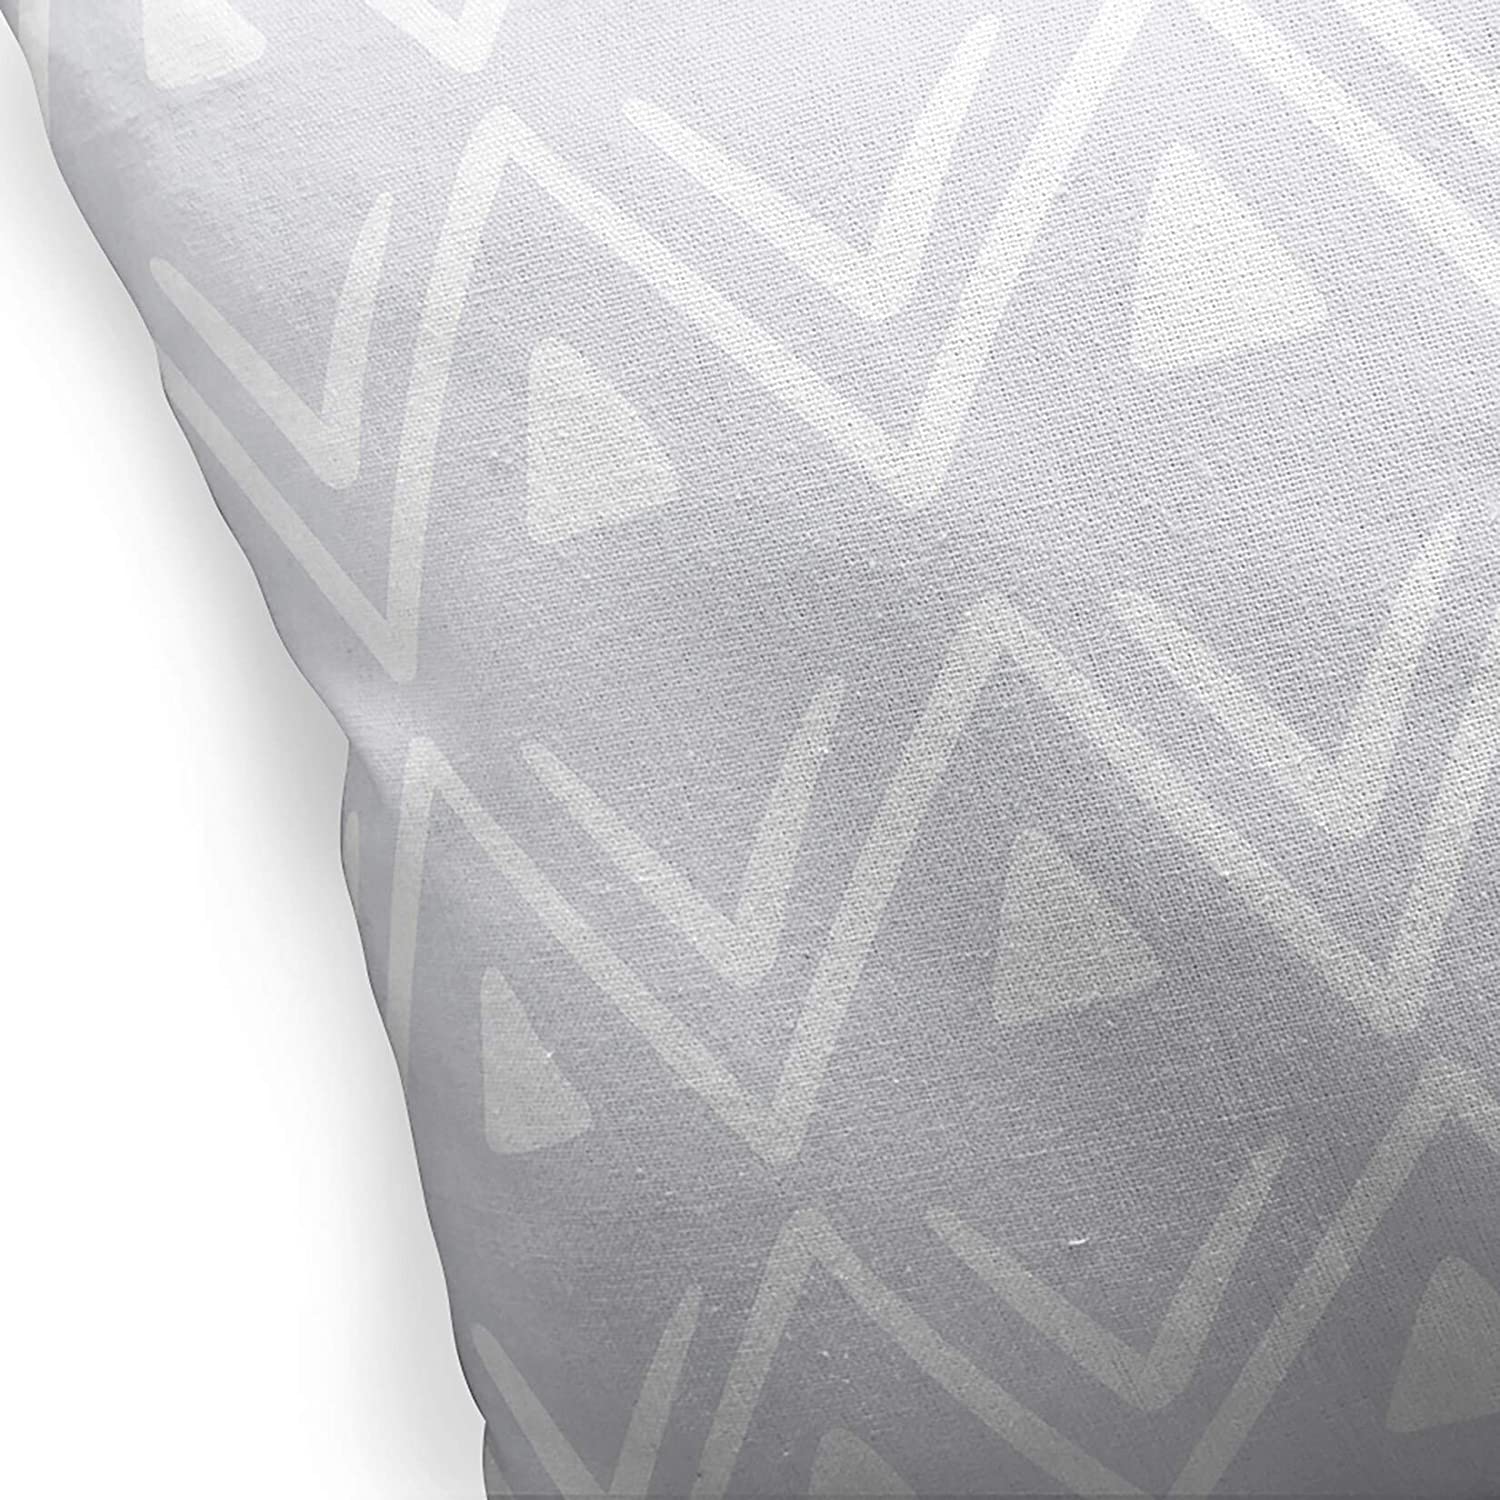 MISC Etched Zig Zag Grey Indoor|Outdoor Pillow by 18x18 Grey Geometric Southwestern Polyester Removable Cover